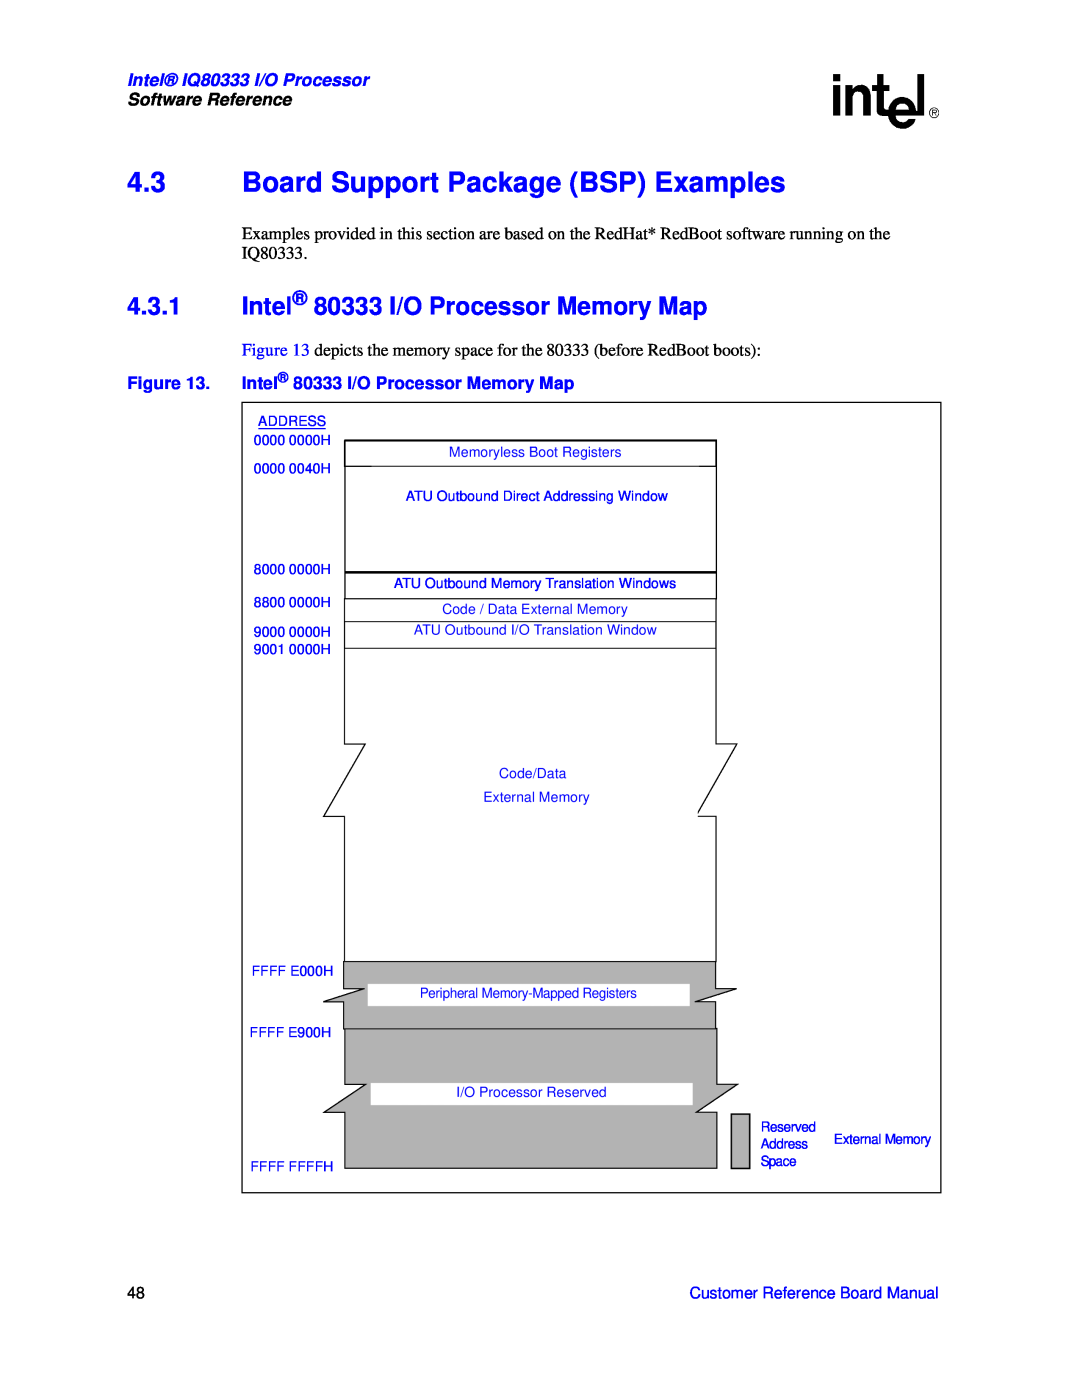 Intel IQ80333 manual 4.3Board Support Package BSP Examples, 4.3.1Intel 80333 I/O Processor Memory Map, Software Reference 